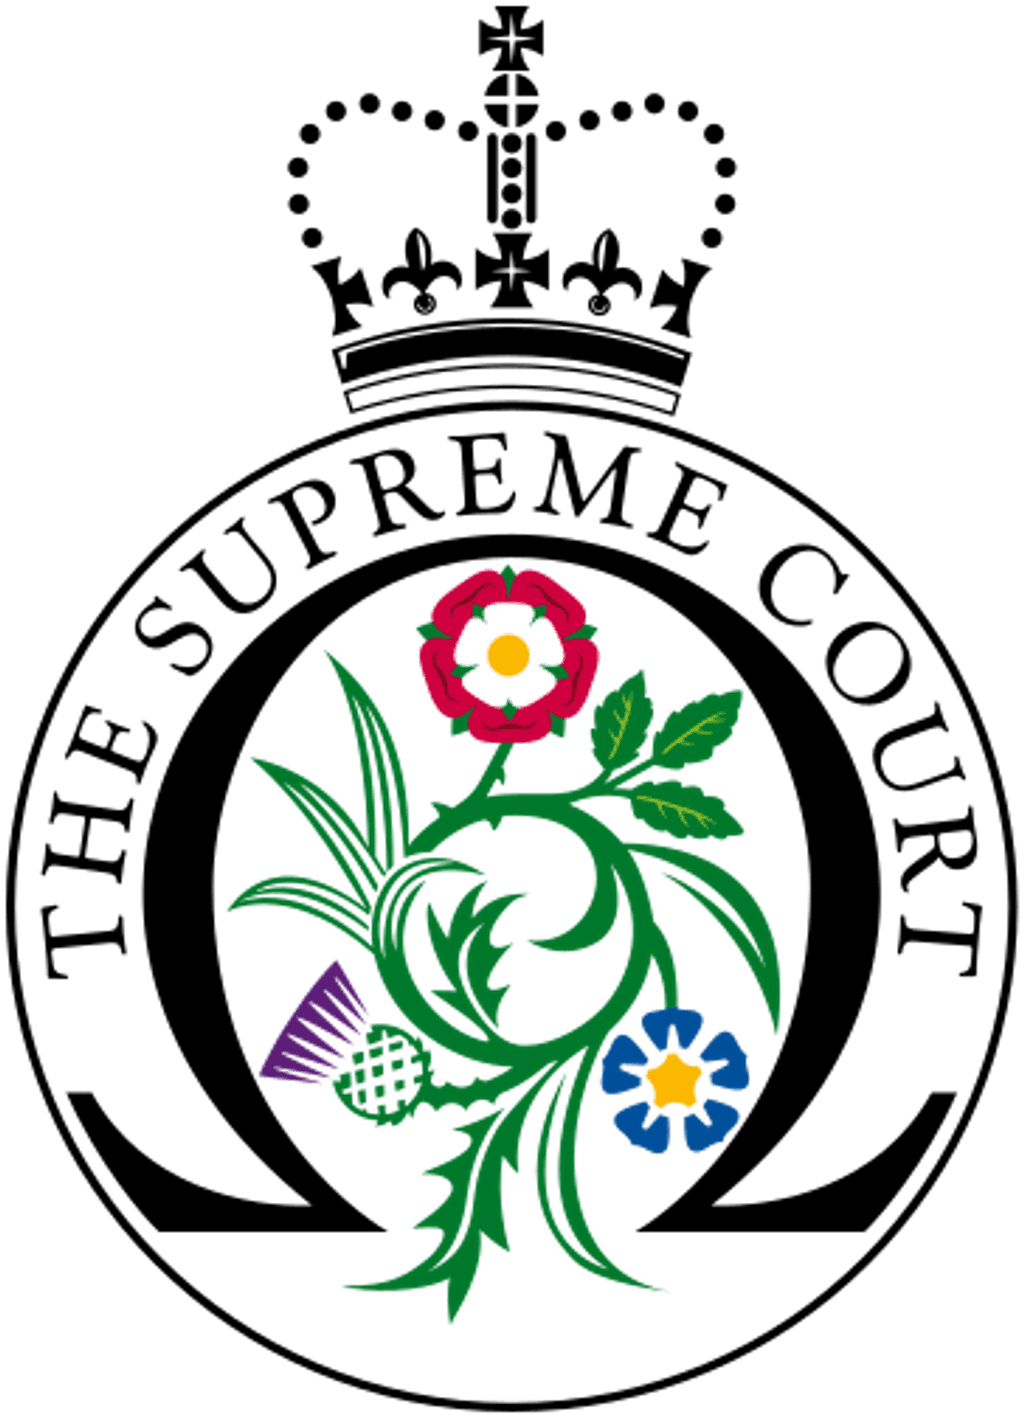 United Kingdom Supreme Court Rules Britain Cannot Provide Evidence to U.S. for Use in Death-Penalty Cases